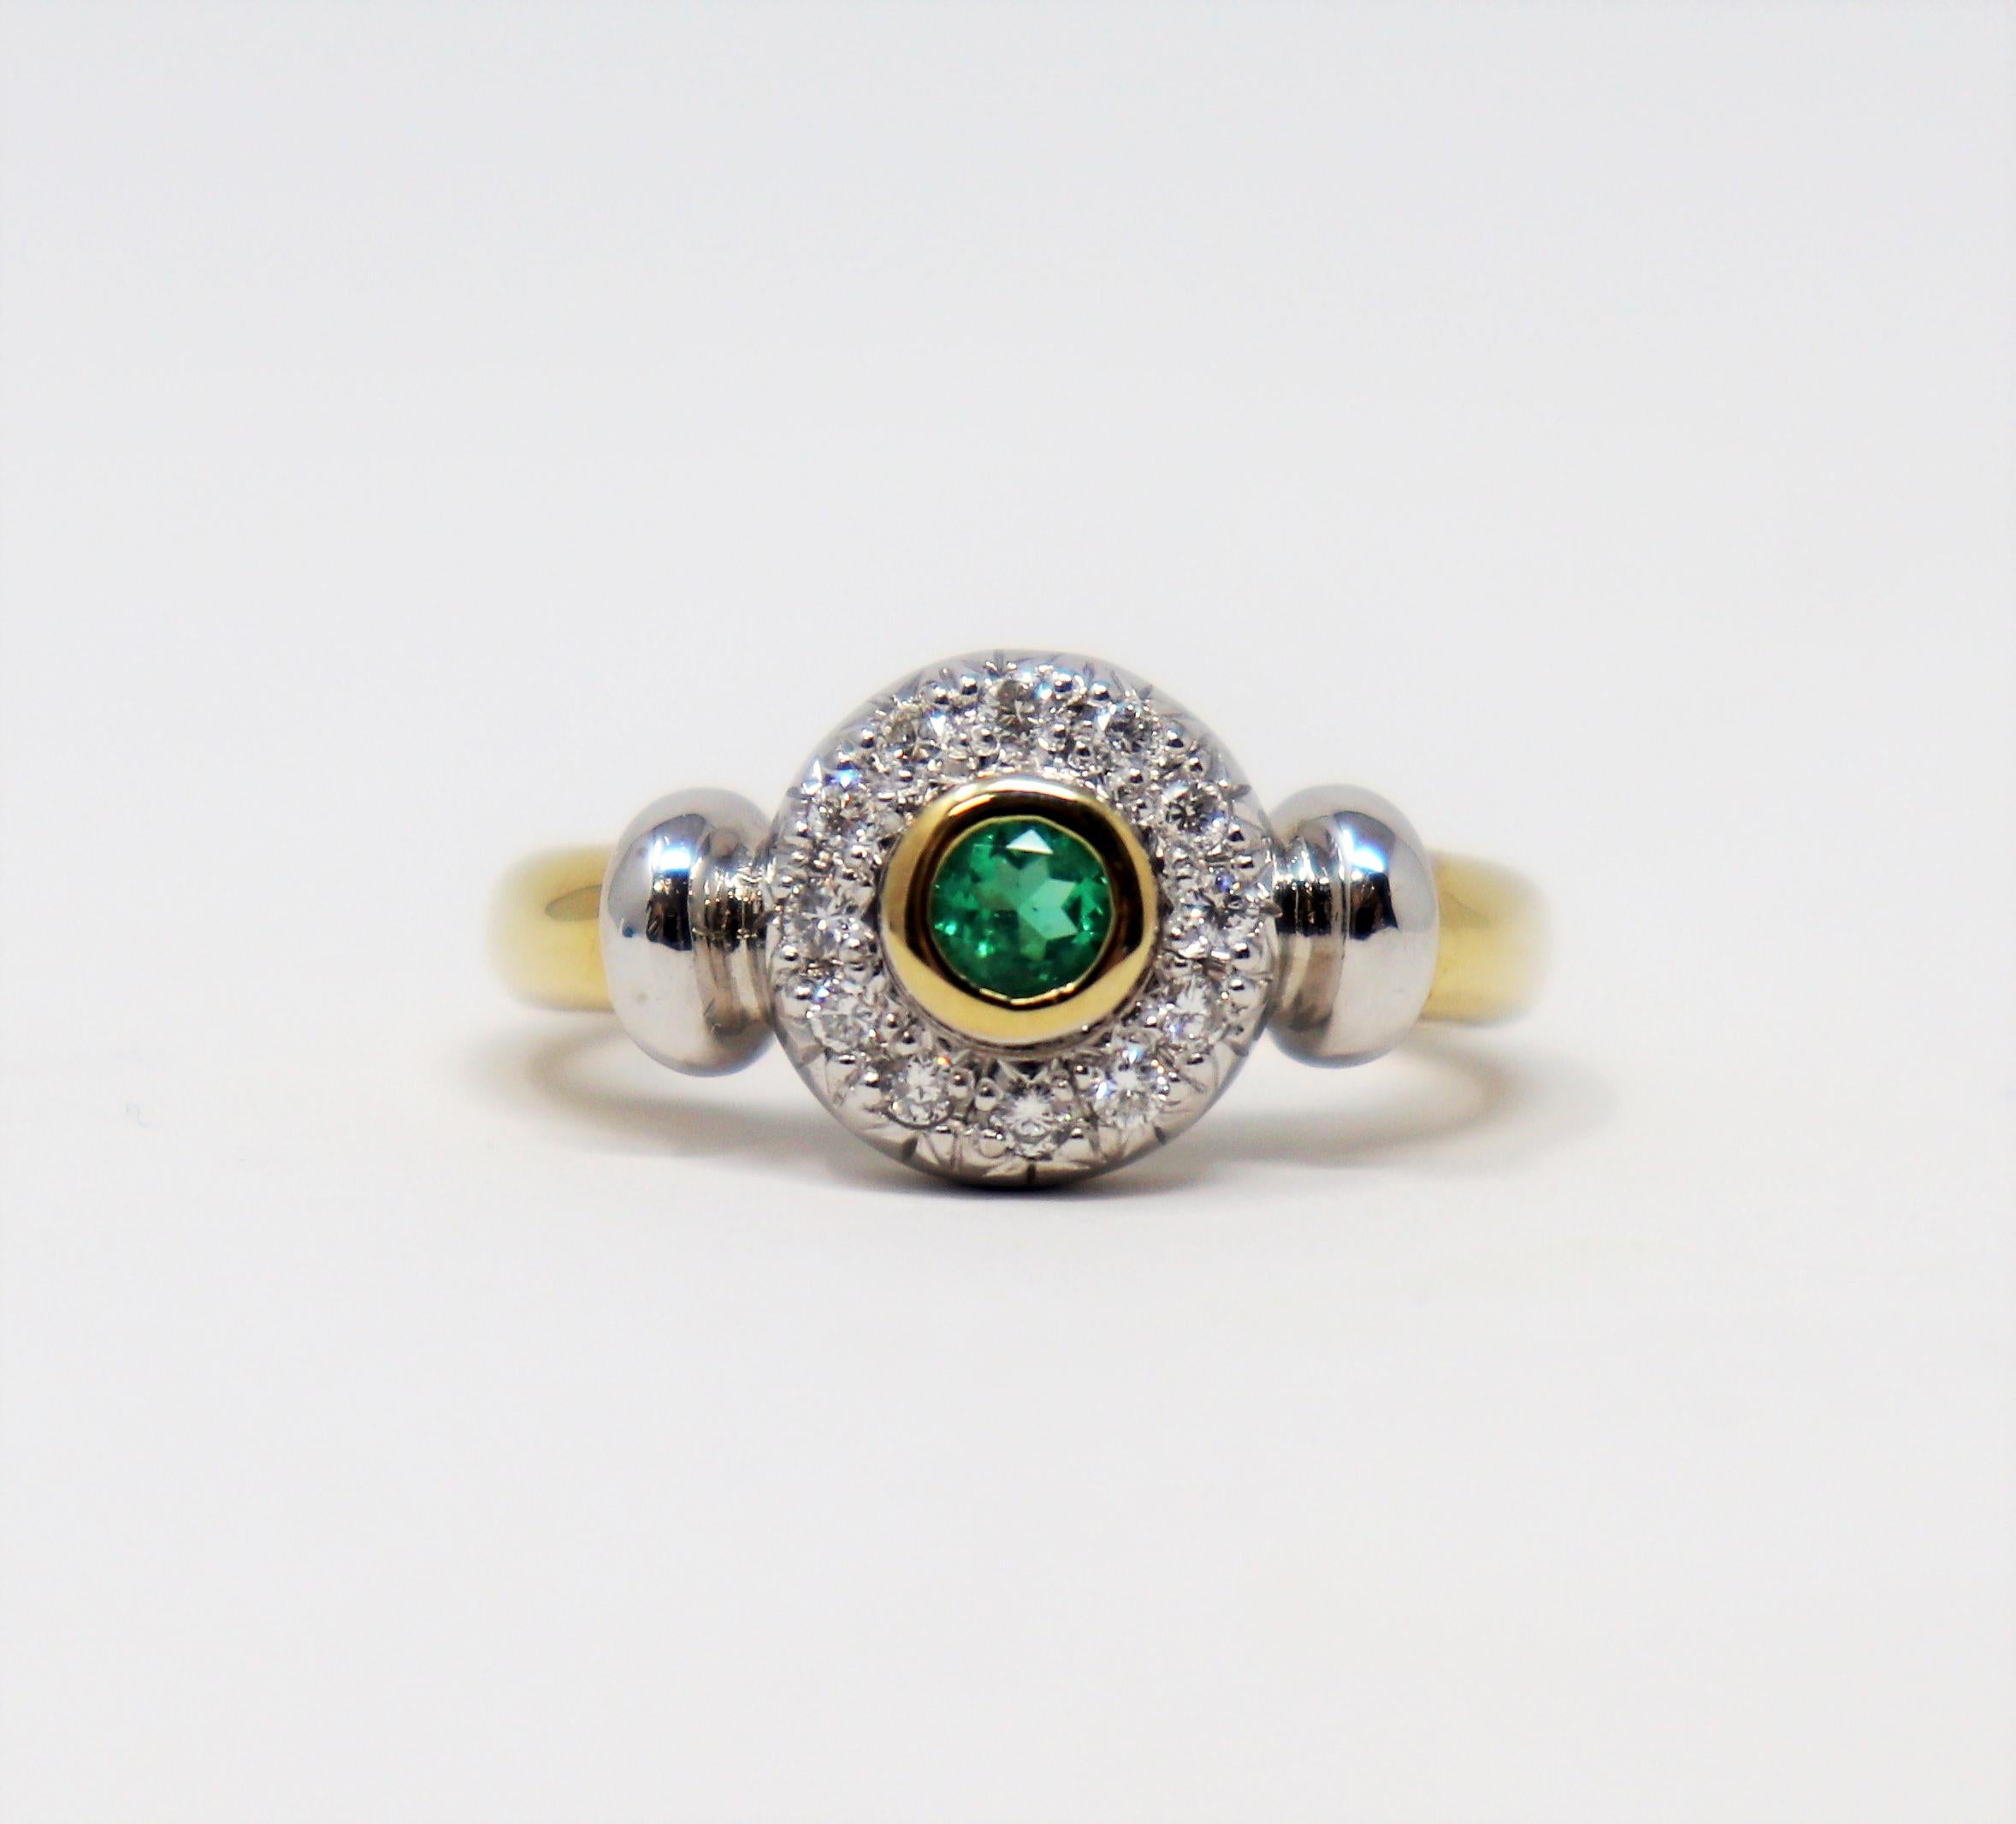 Ring size: 5.25

This contemporary band ring dazzles with understated elegance. The bright green natural emerald is nestled among a sparkling pave halo of diamonds, while the polished two tone metal creates a modern aesthetic. 

This beautiful ring